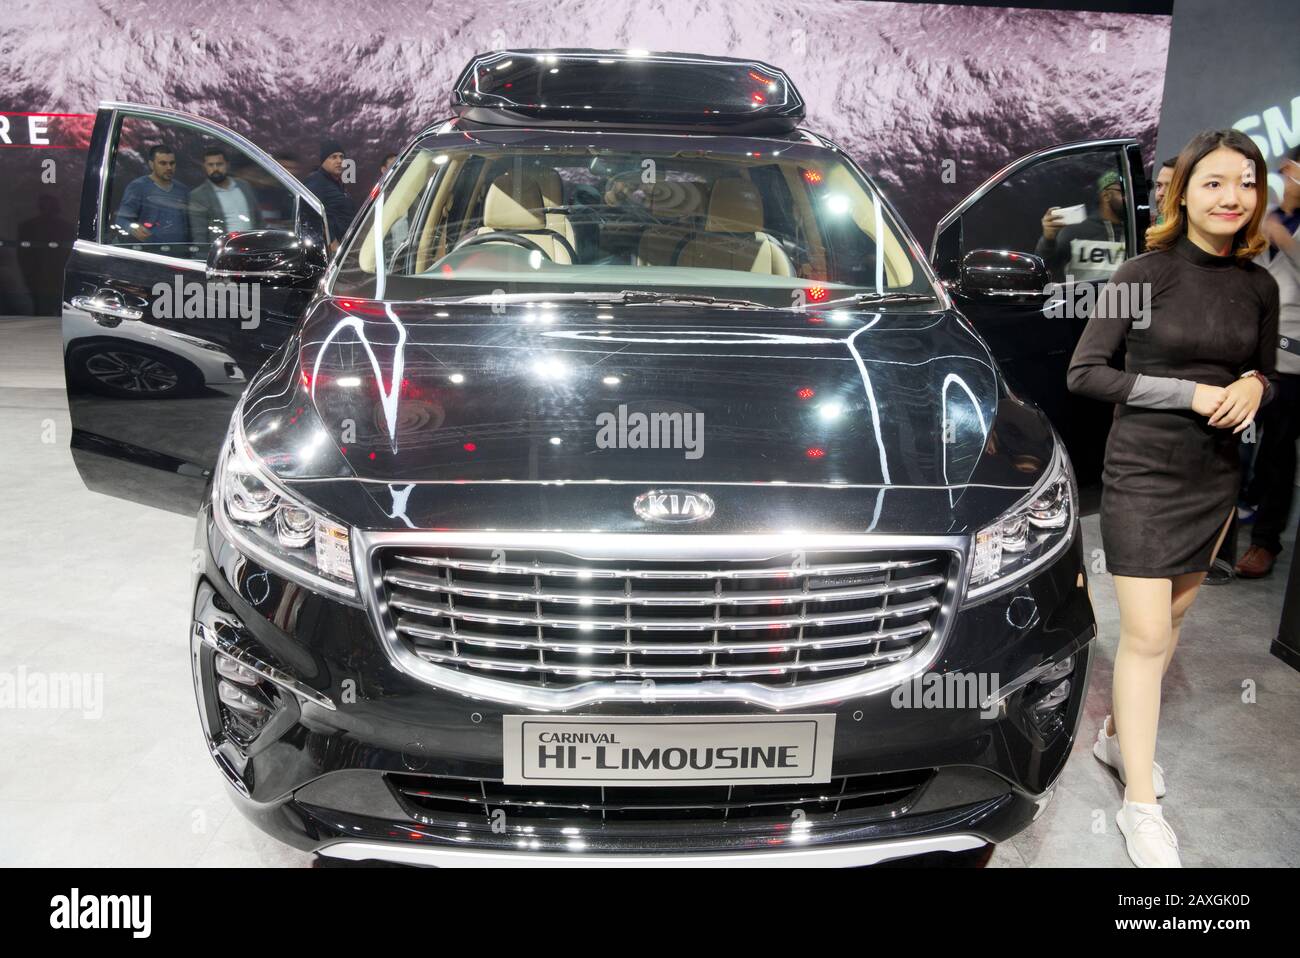 GREATER NOIDA, INDIA – FEBRUARY 7, 2020: Visitors check out the Kia Carnival Hi-Limousine on display at Auto Expo 2020 at Greater Noida in India. Stock Photo